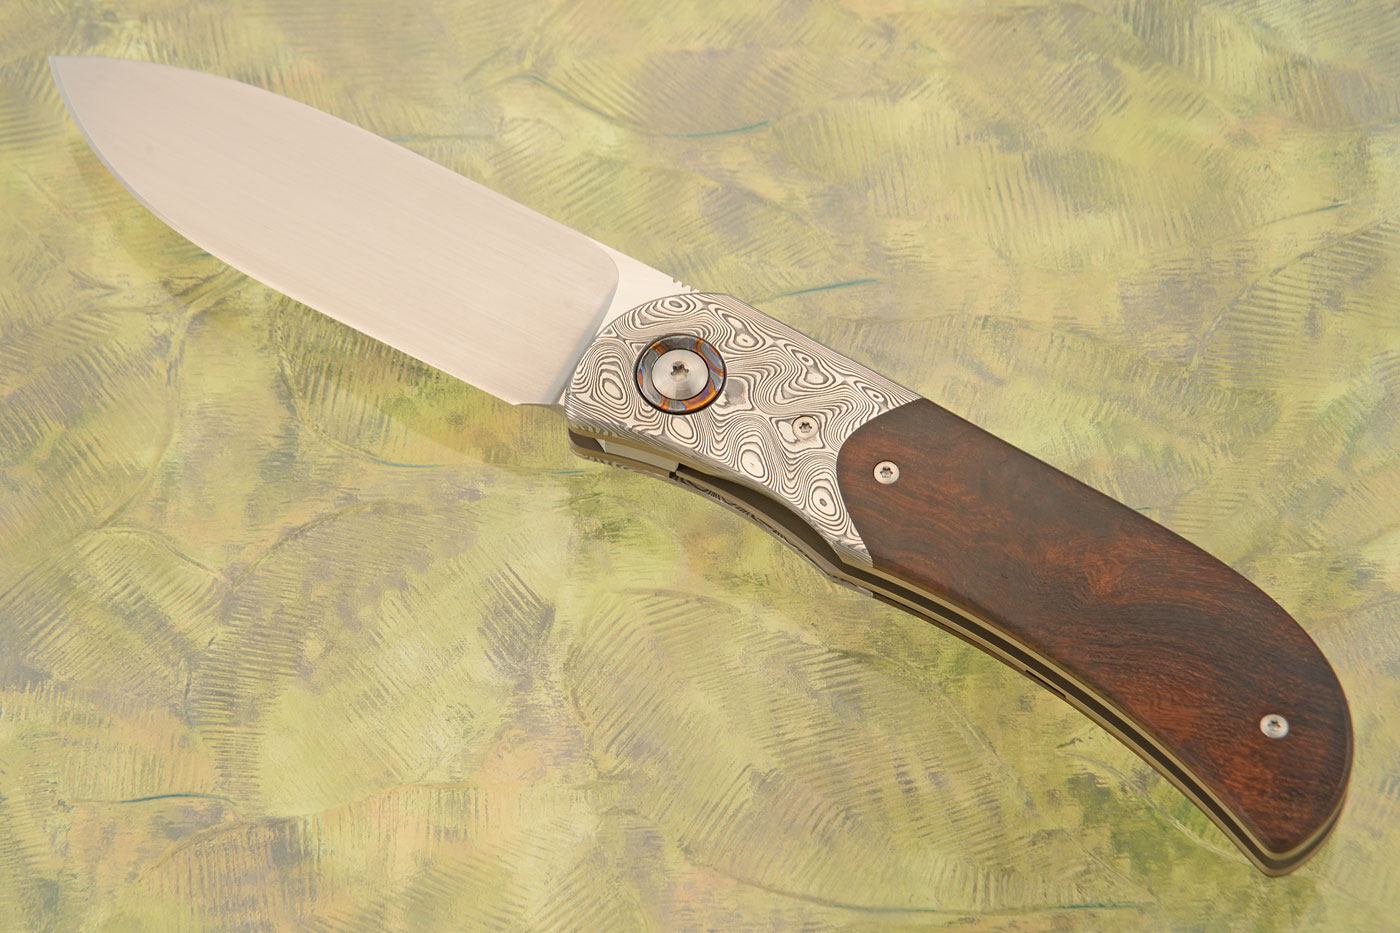 LEXK Plus Front Flipper with Ironwood, Damascus and Timascus - M390